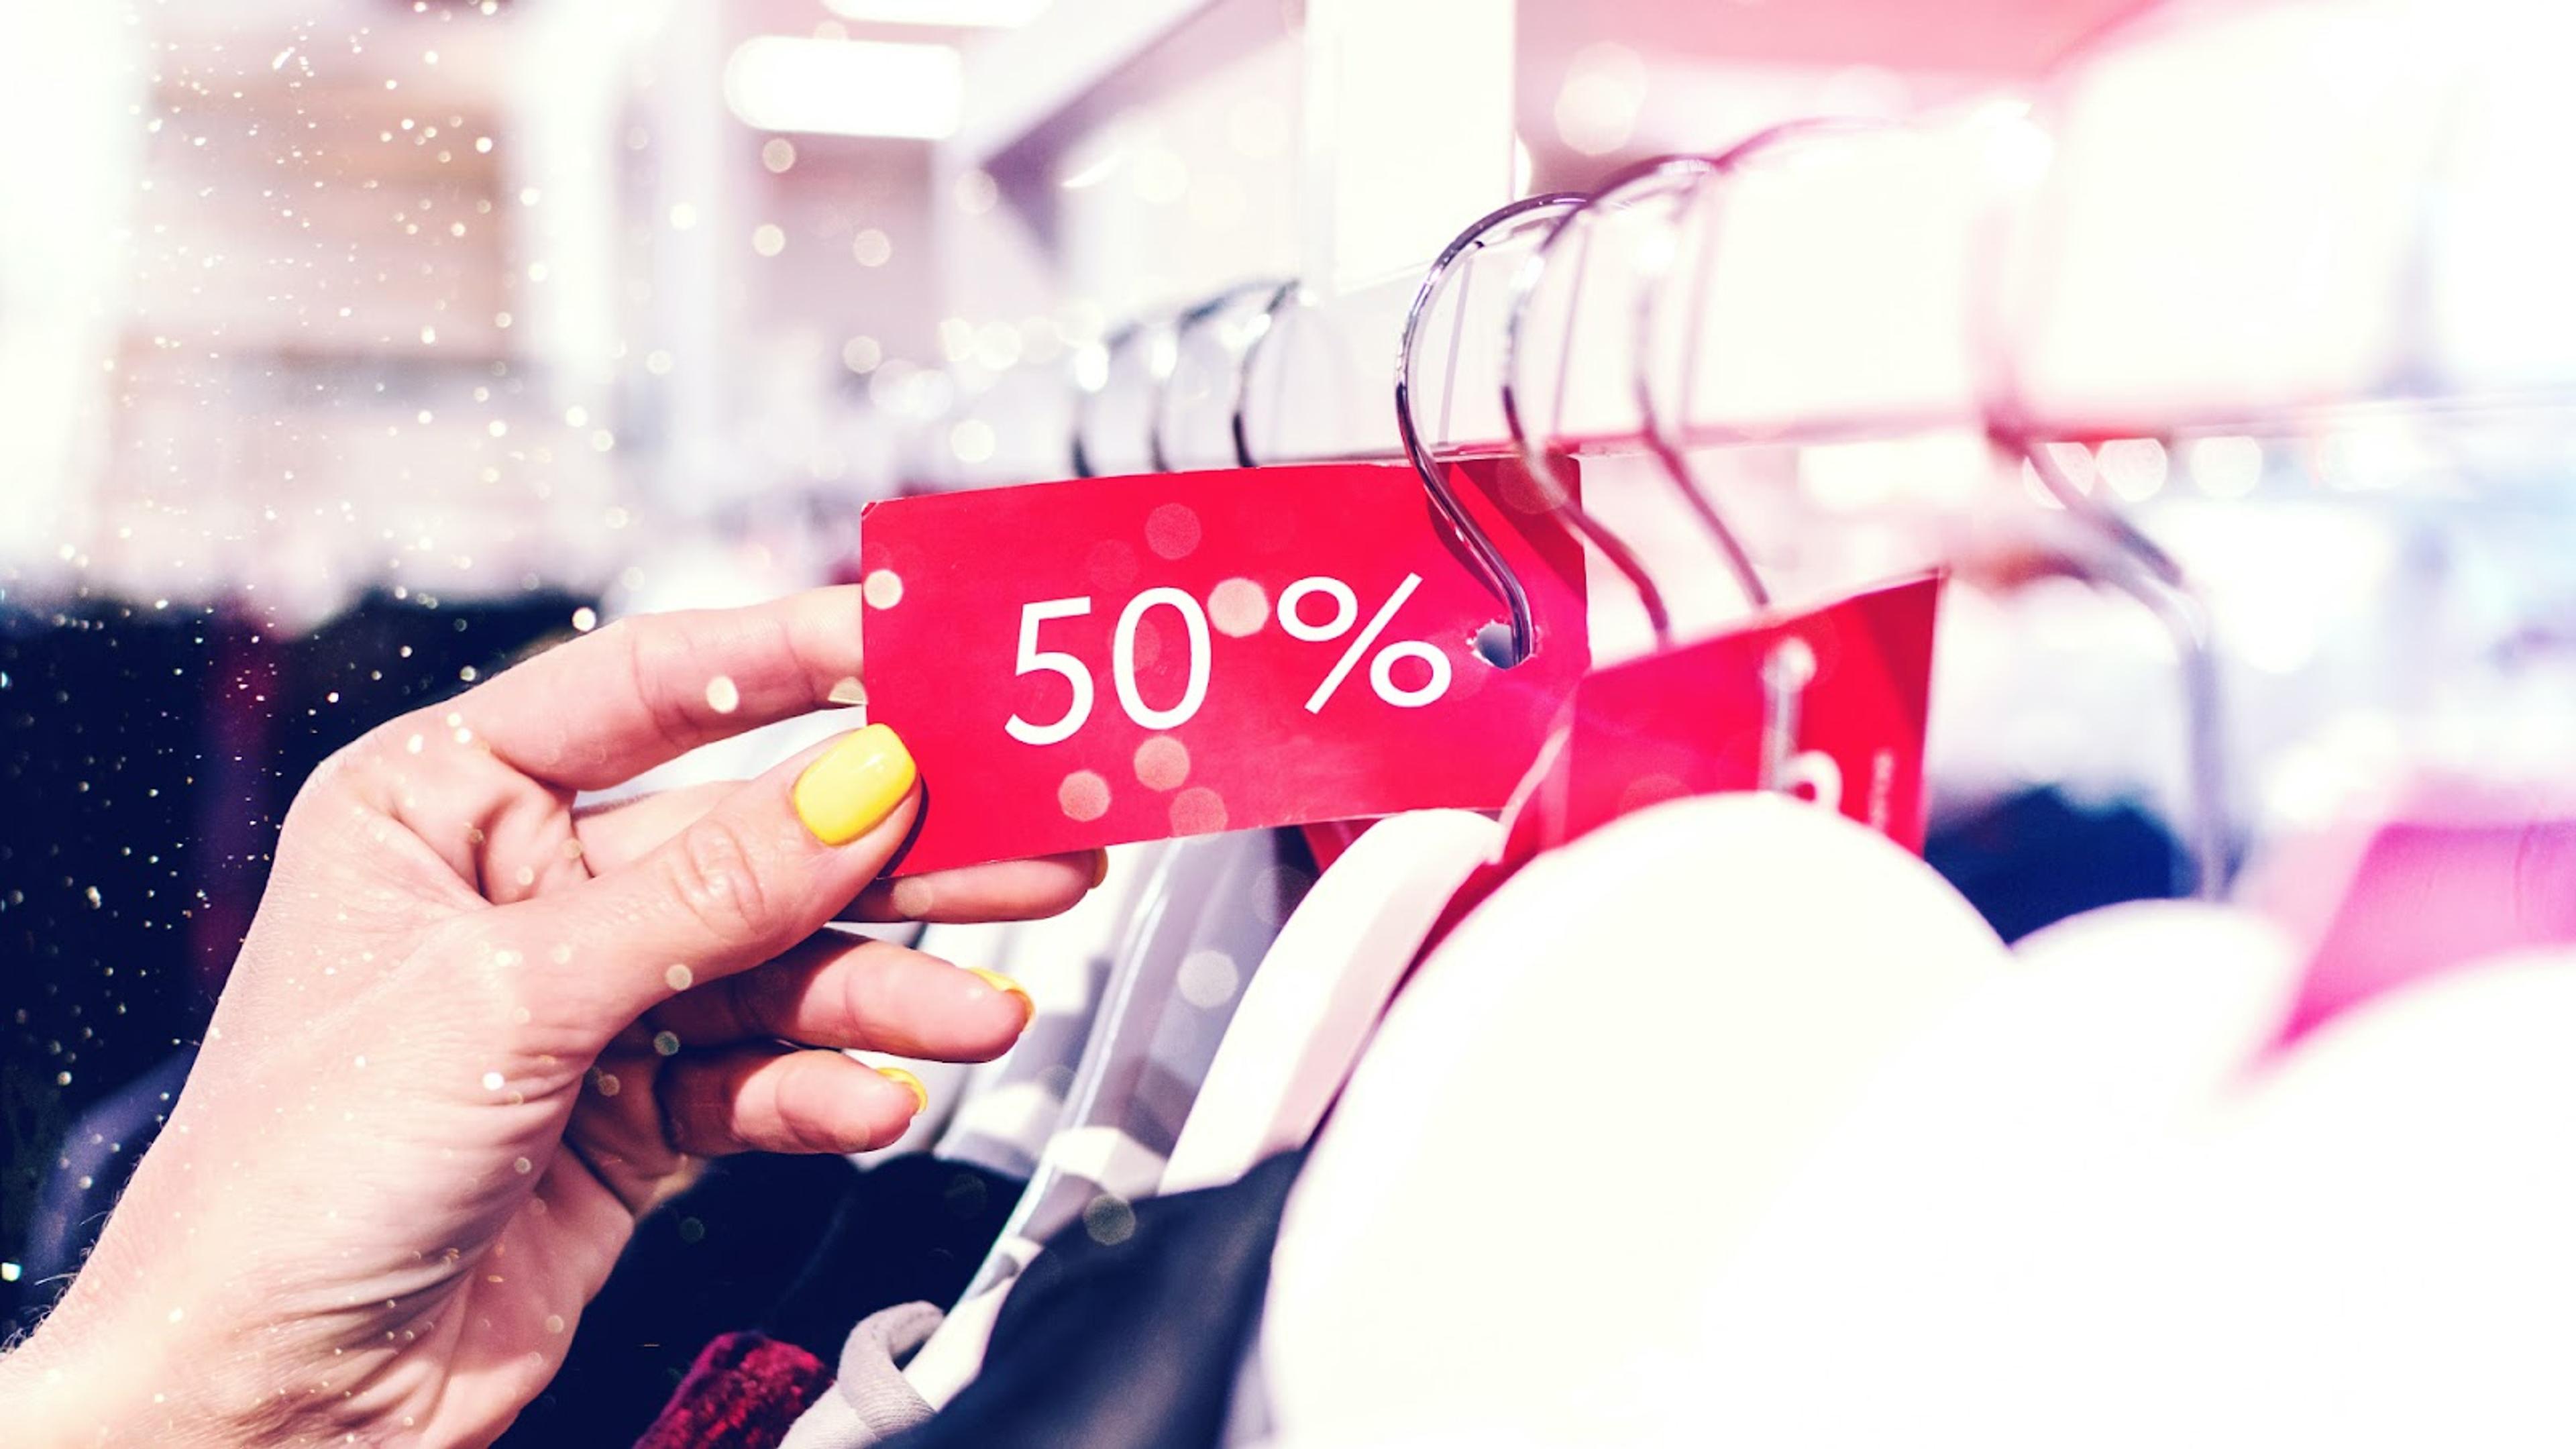 What Are "Discounts" in Marketing?